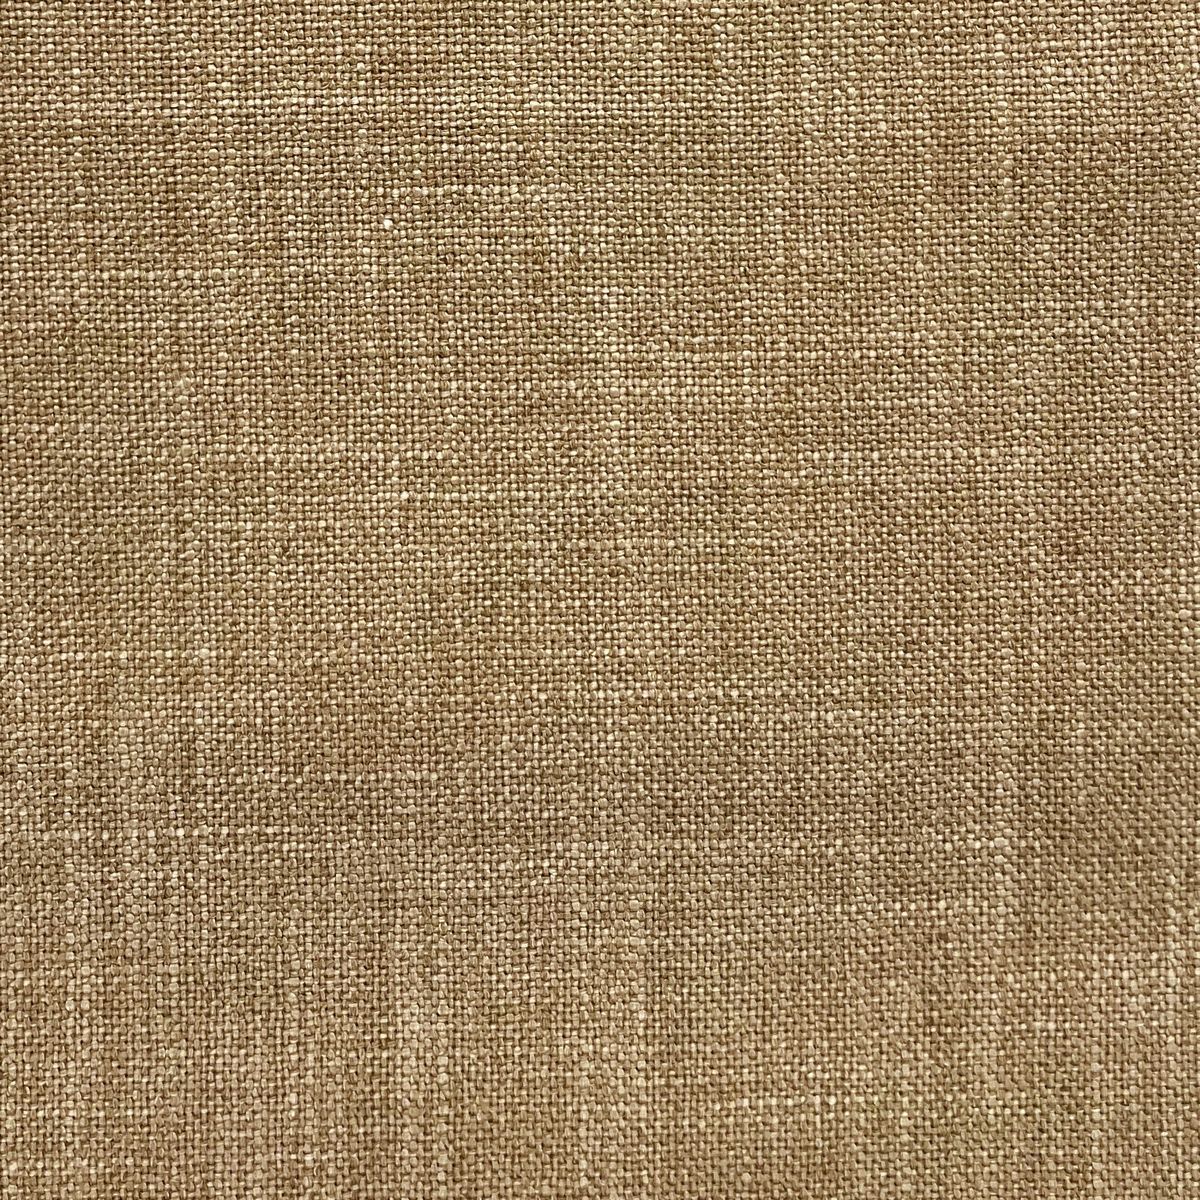 Cotswold Linen Fabric by Chatham Glyn